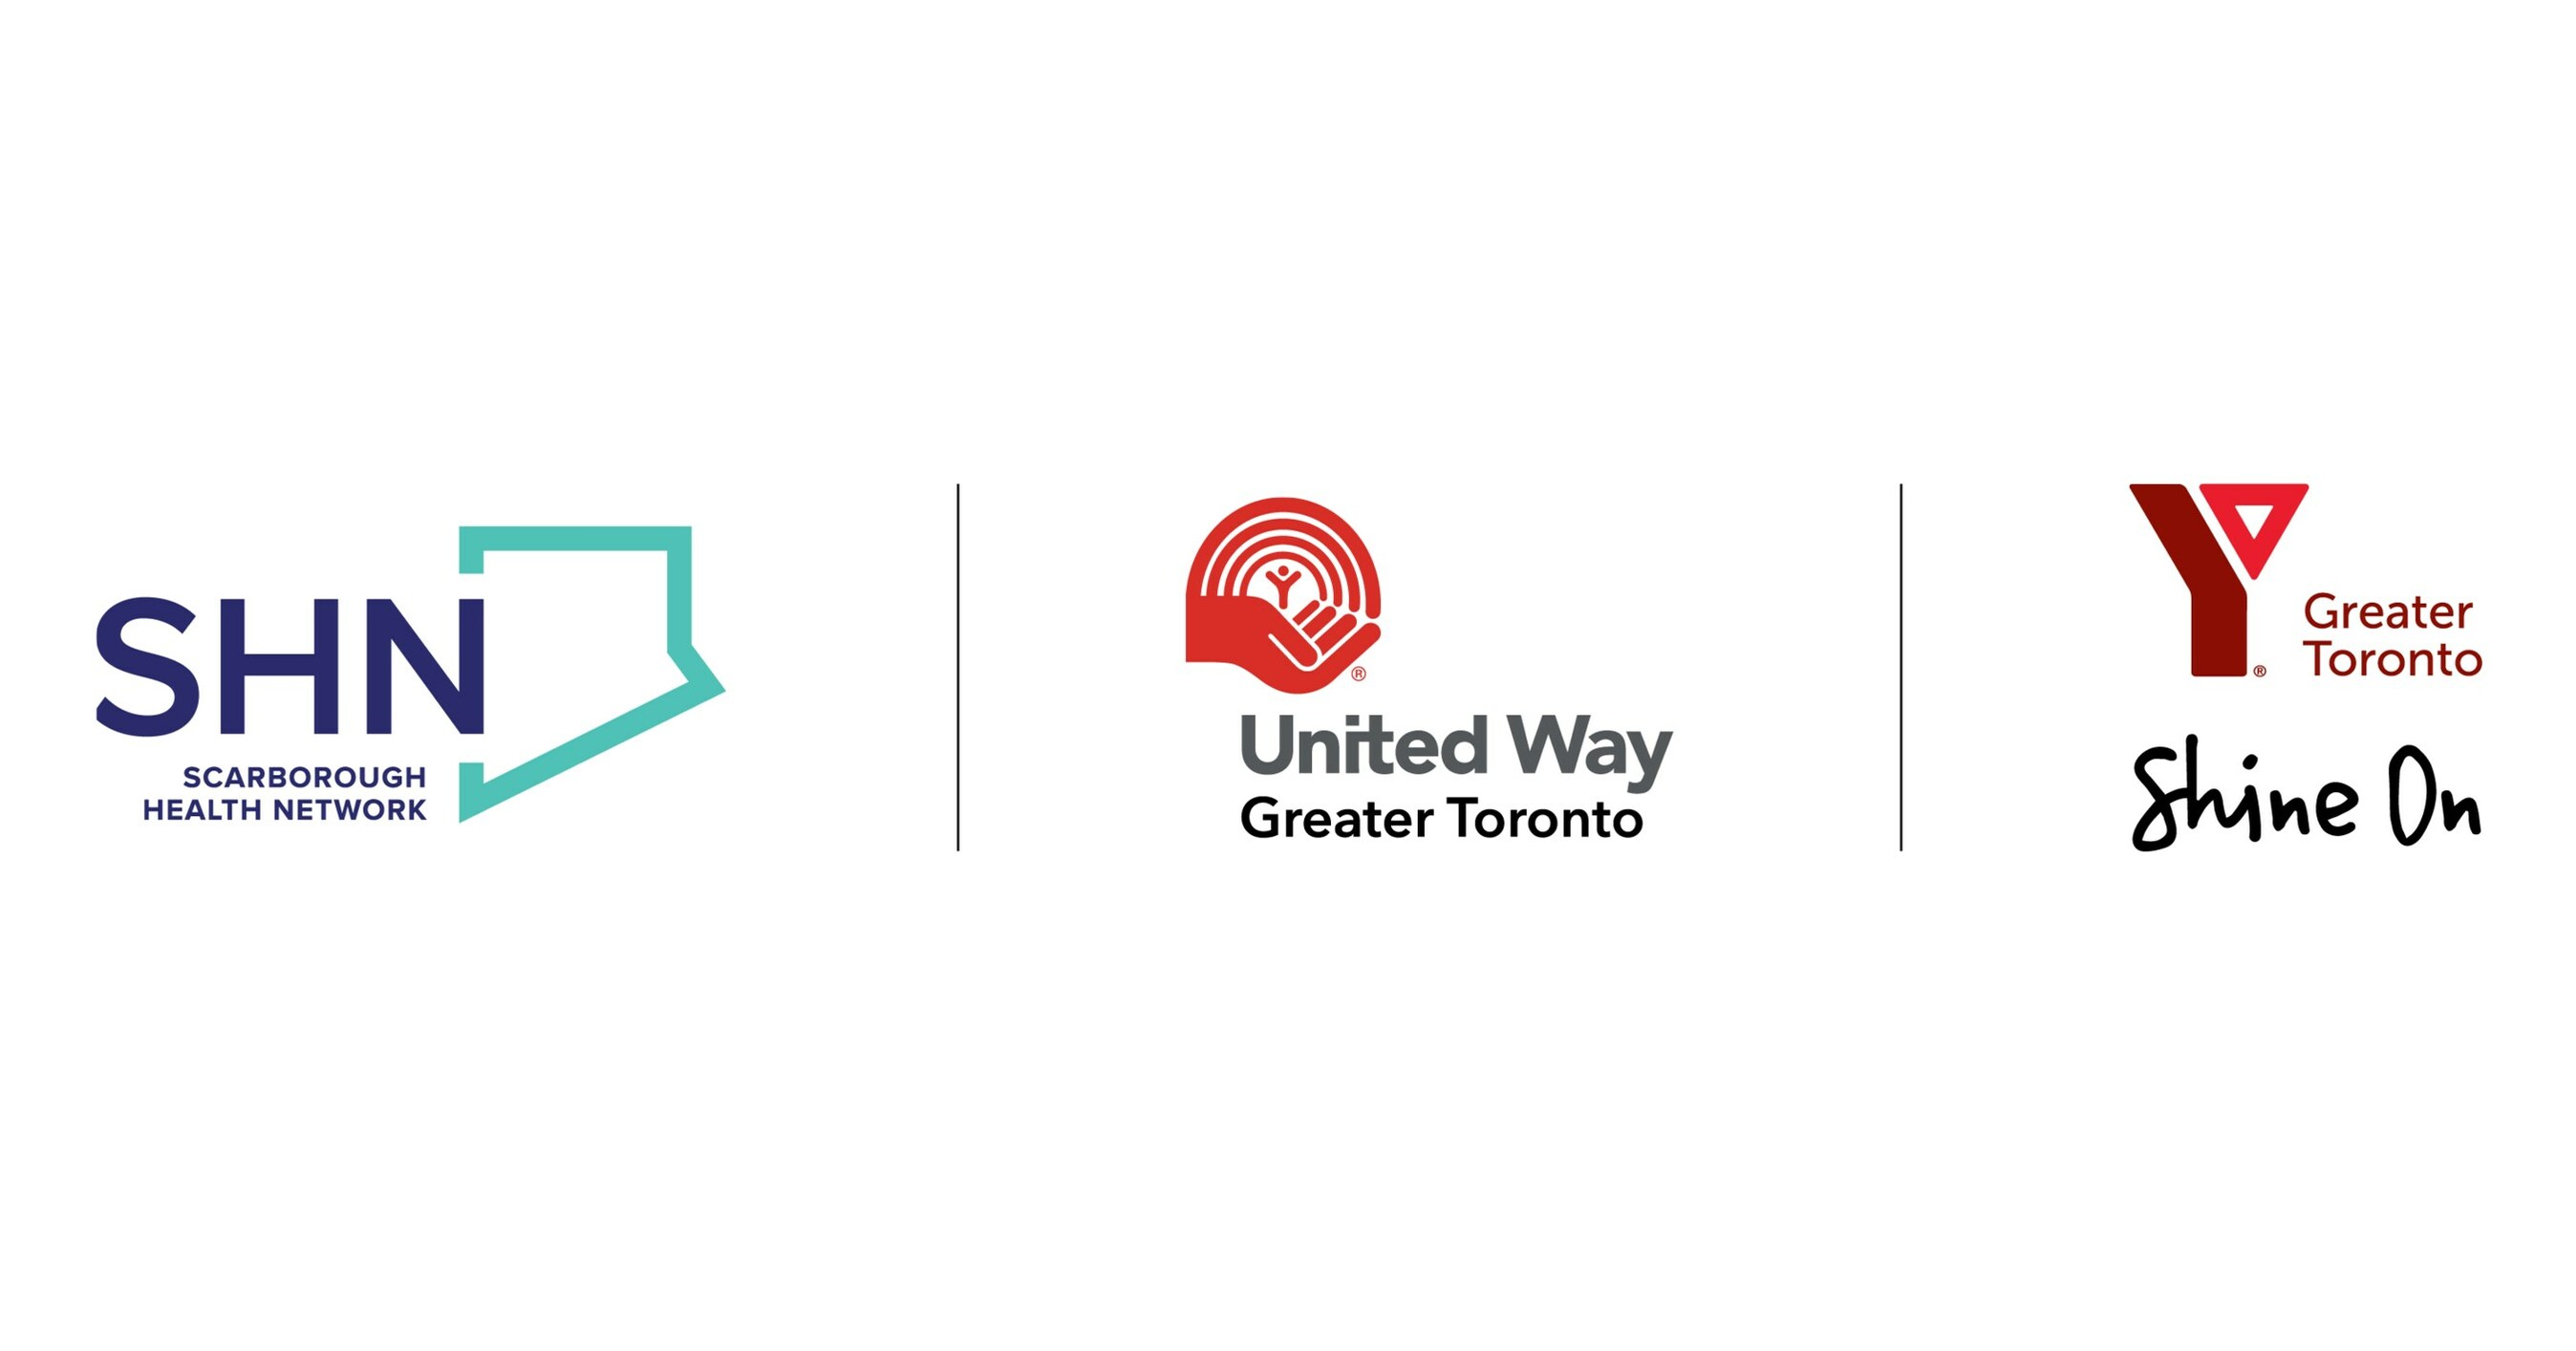 Bridletowne Neighbourhood Centre in Scarborough, Ontario breaks ground at celebratory event hosted by Scarborough Health Network, United Way Greater Toronto and the YMCA of Greater Toronto